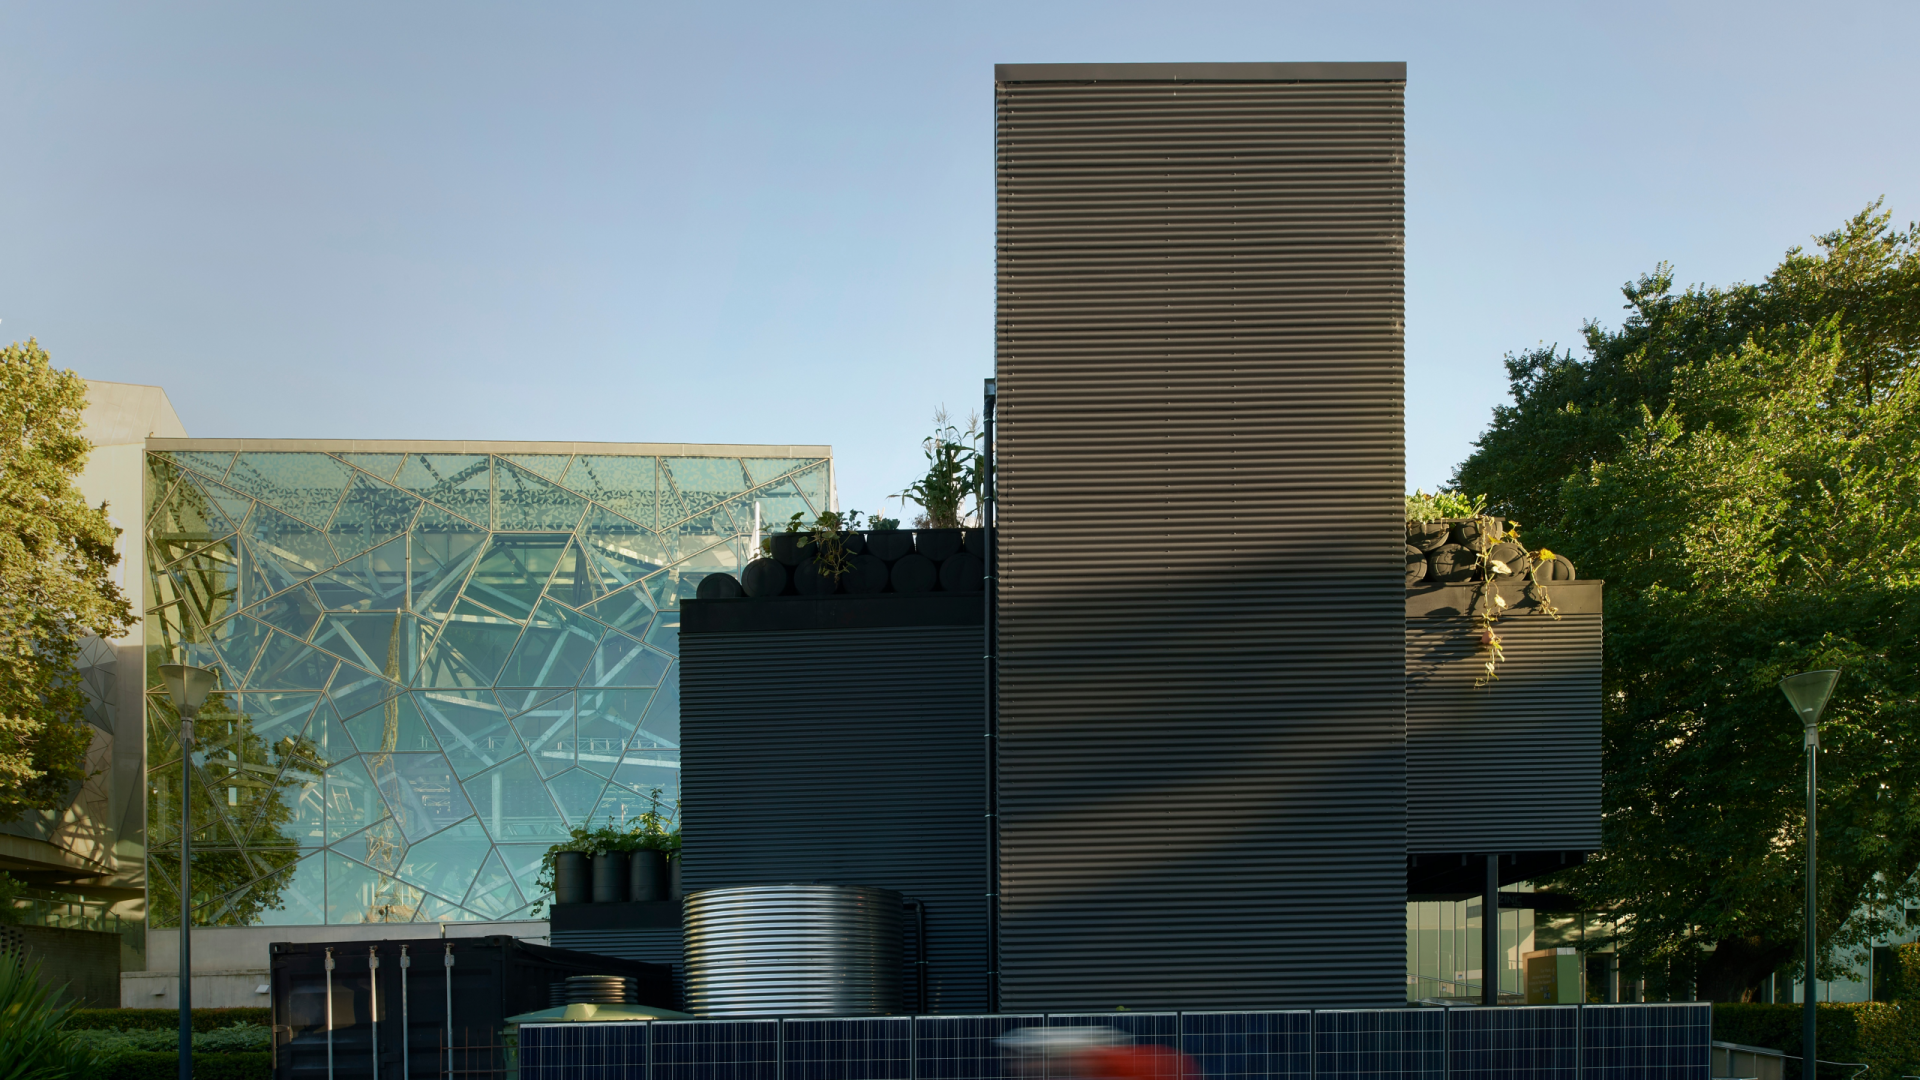 image of a modern urban building with solar panels, rooftop garden and water tanks in the early morning light